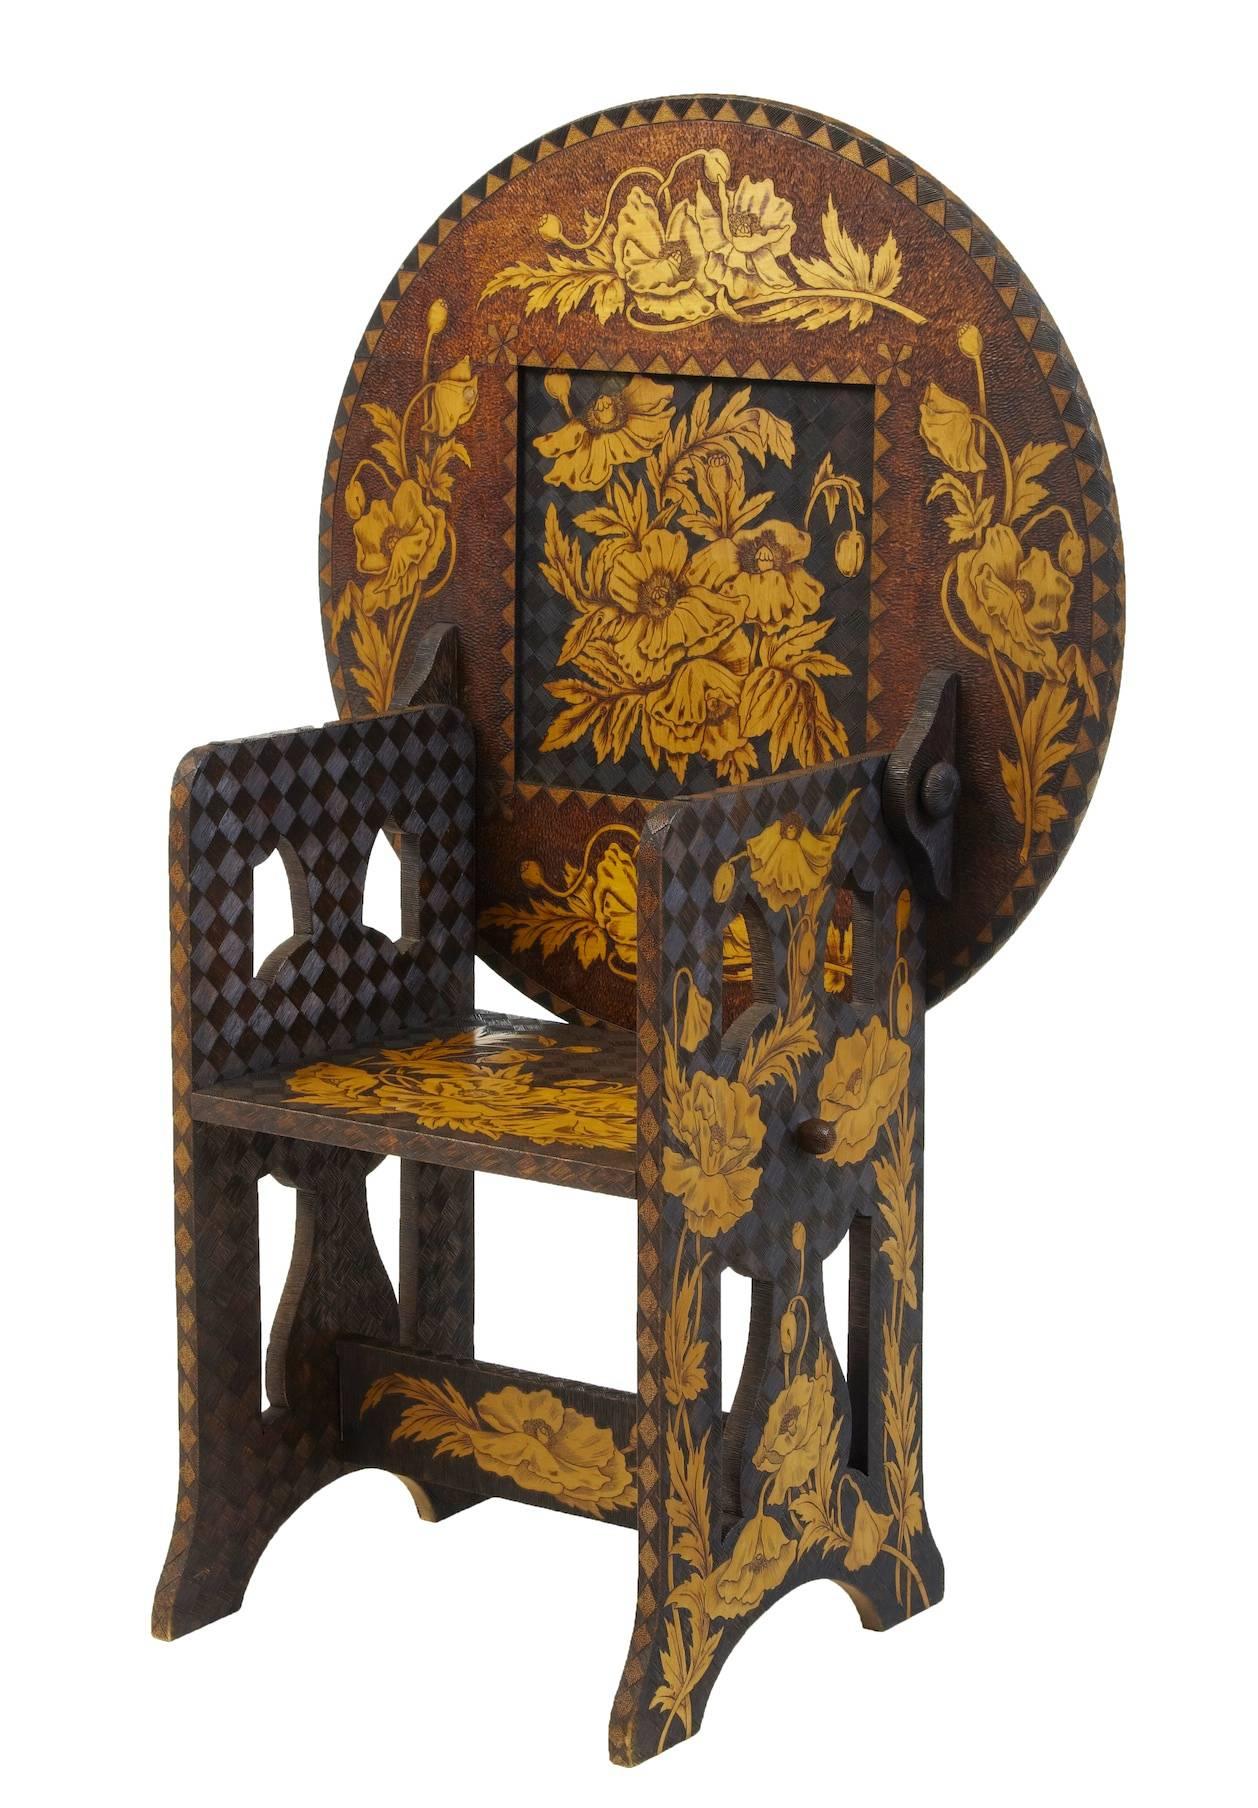 Early 20th century American, Arts & Crafts collection of Poker Work Furniture

Unusual collection of poker work furniture signed by maker martin Hokansen Boston mass USA.
Superb quality poker work from this maker, depicting lions, florals and